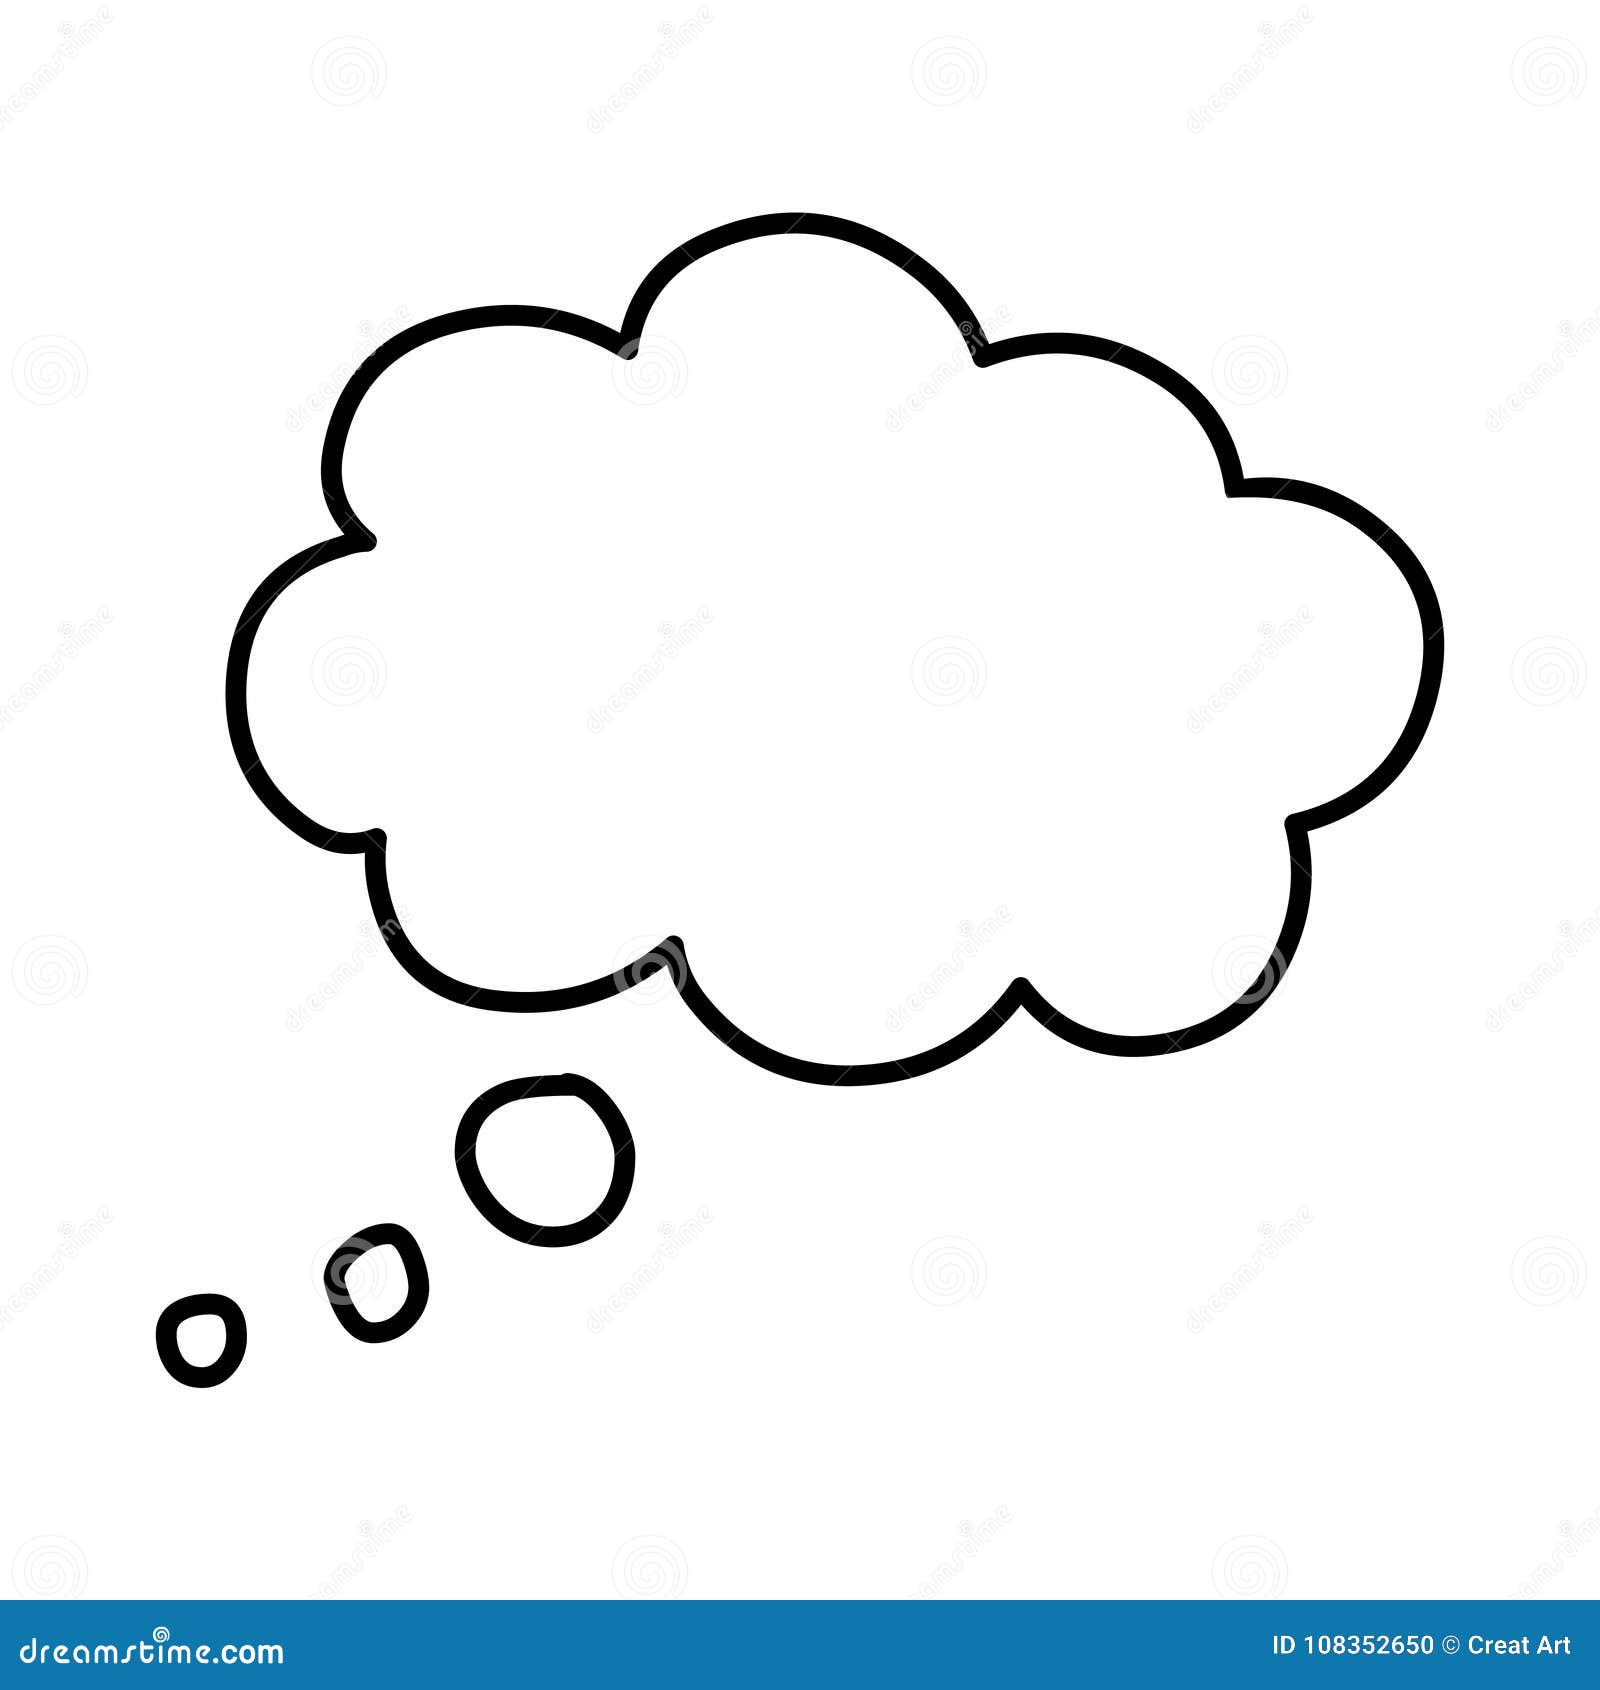 Thinking Cloud,Thought Cloud.Vector Line Art Of Thought Cloud. Stock